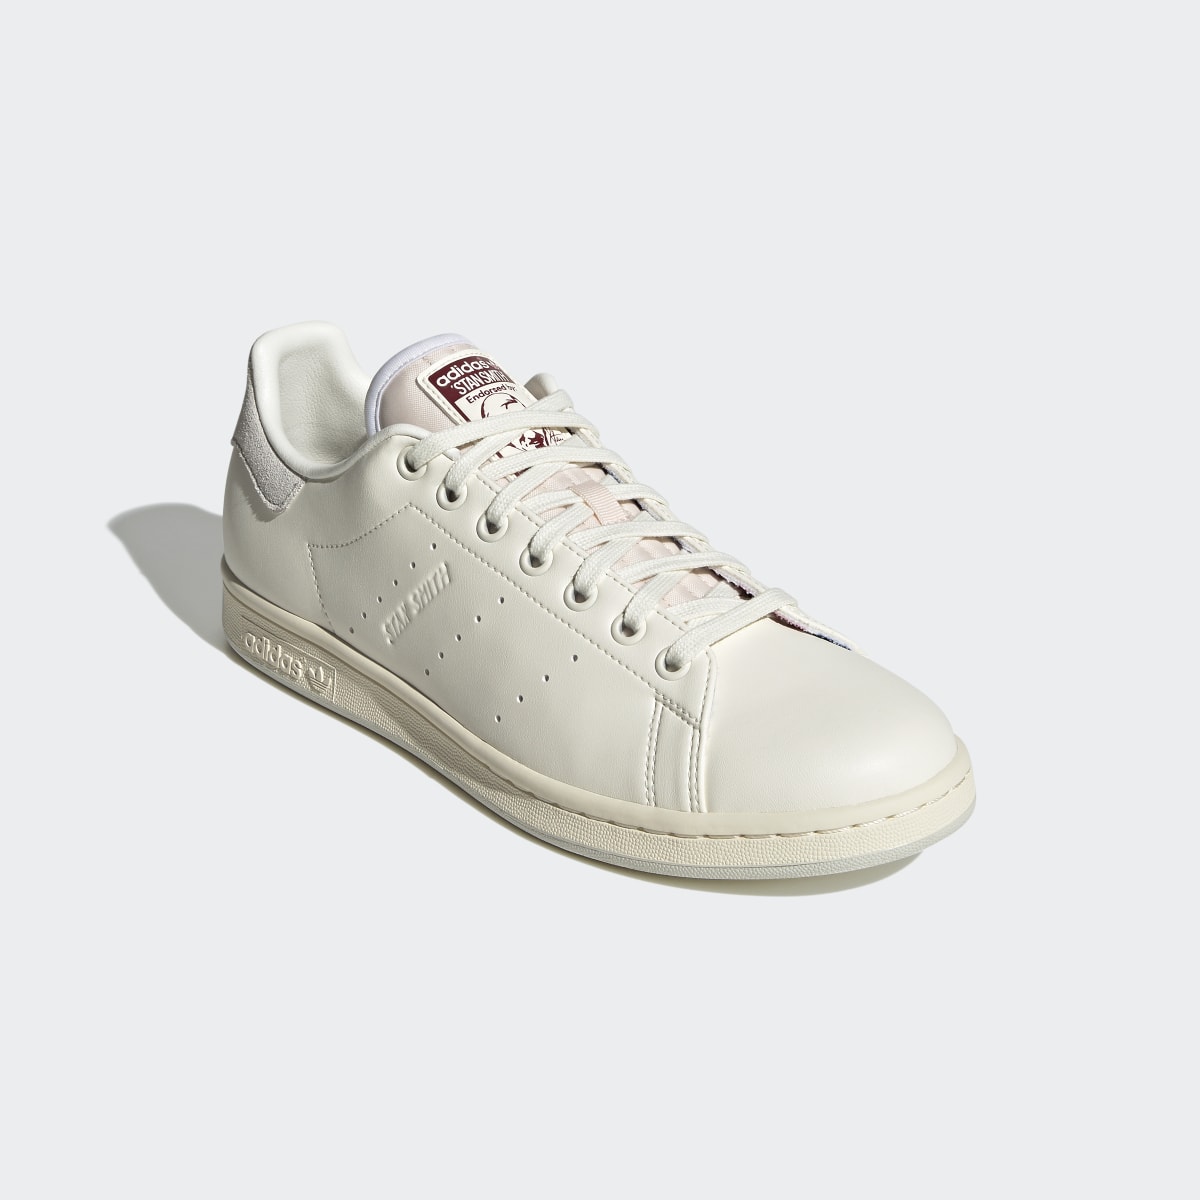 Adidas Stanniversary Stan Smith Shoes. 10